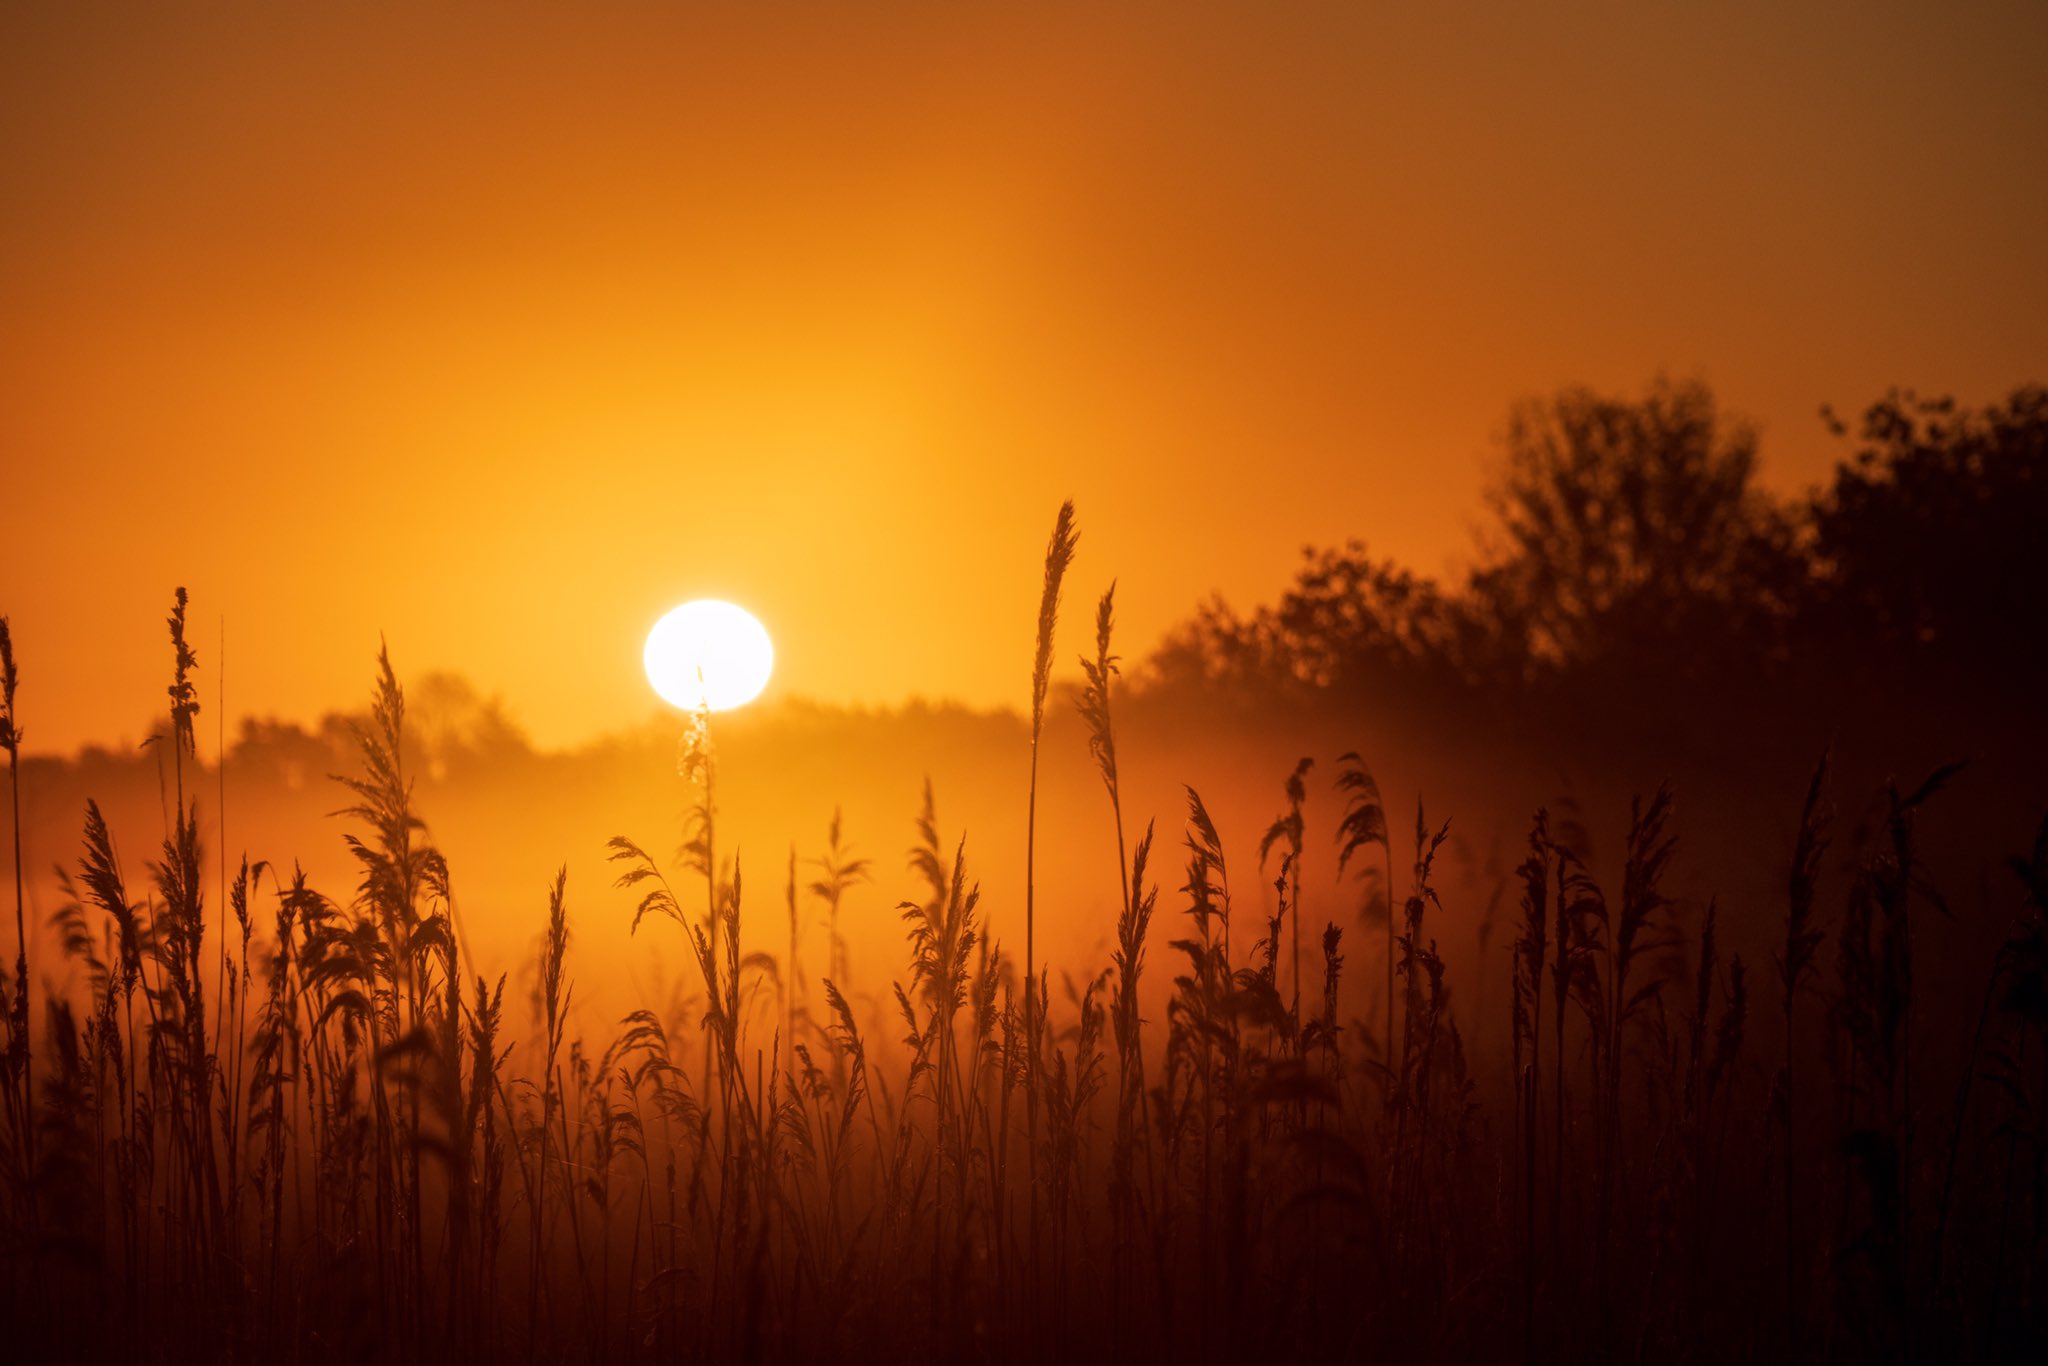 2nd Place Golden light shining through the reeds on Burwell Fen by Glynis Pierson @glynpierson